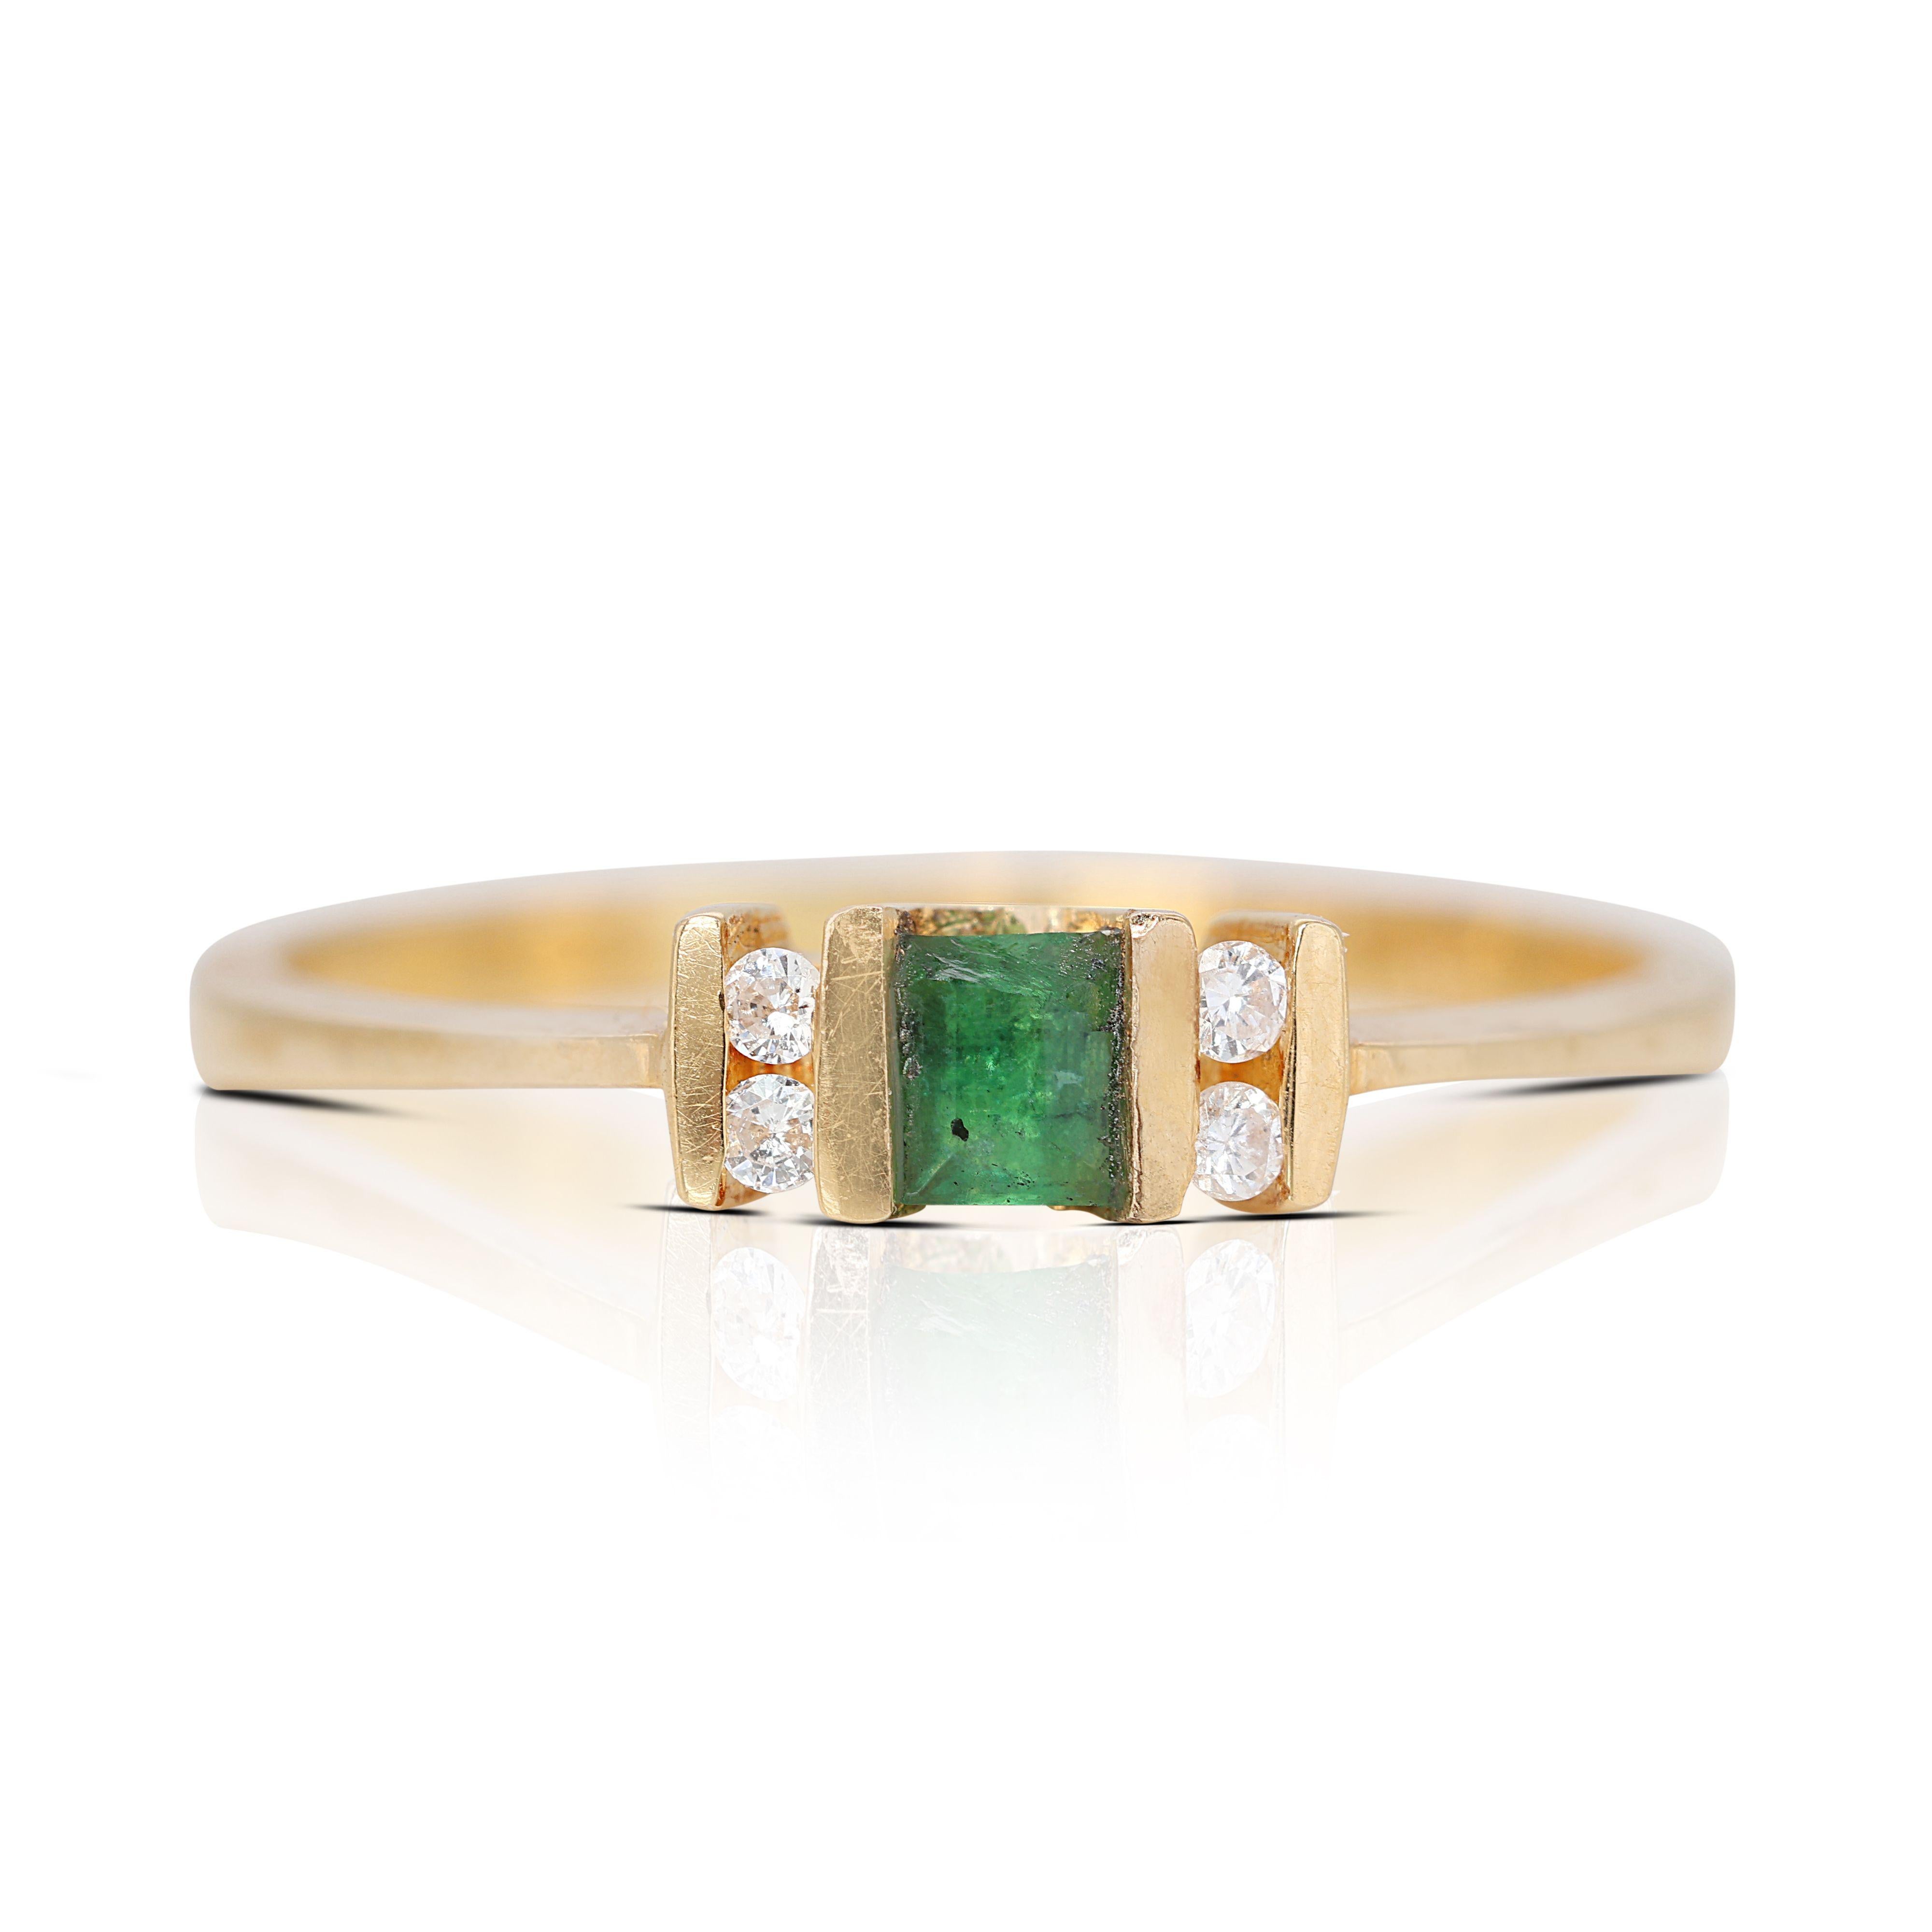 Round Cut Exquisite 3-stone Emerald Diamond Ring in 18K Yellow Gold For Sale